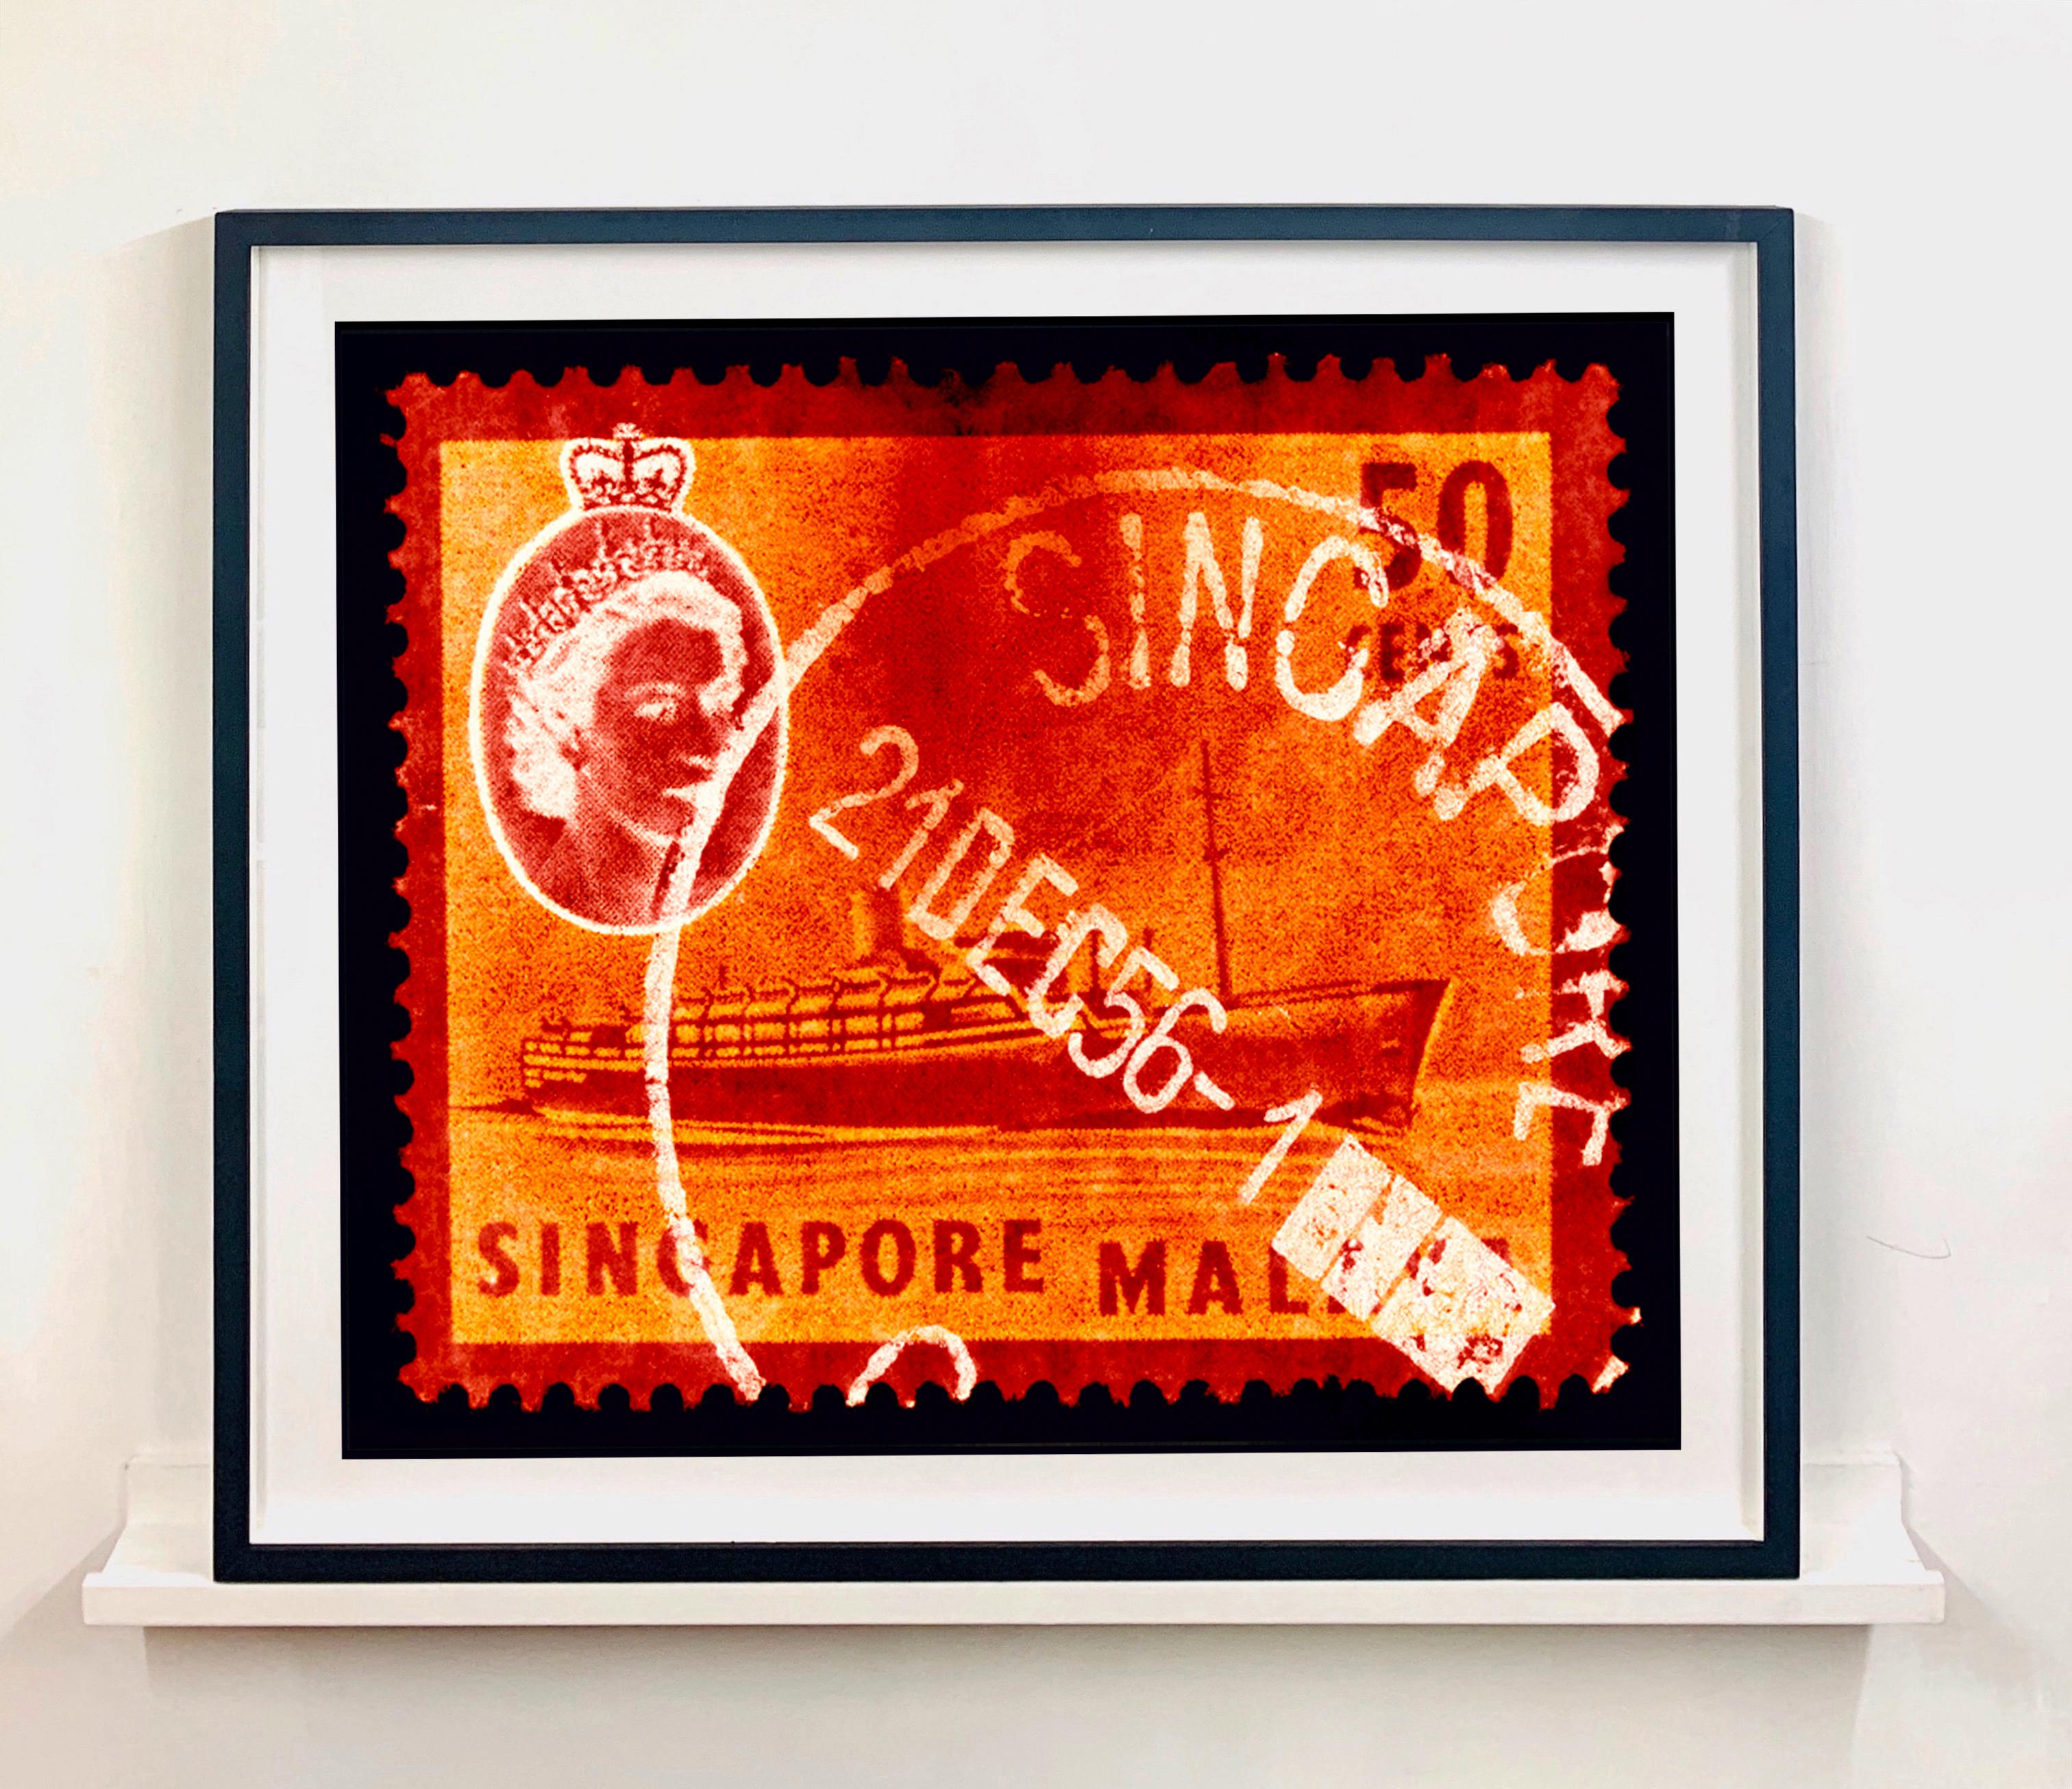 Singapore Stamp Collection, 50c QEII Steamer Ship Orange - Pop Art Color Photo - Red Color Photograph by Heidler & Heeps